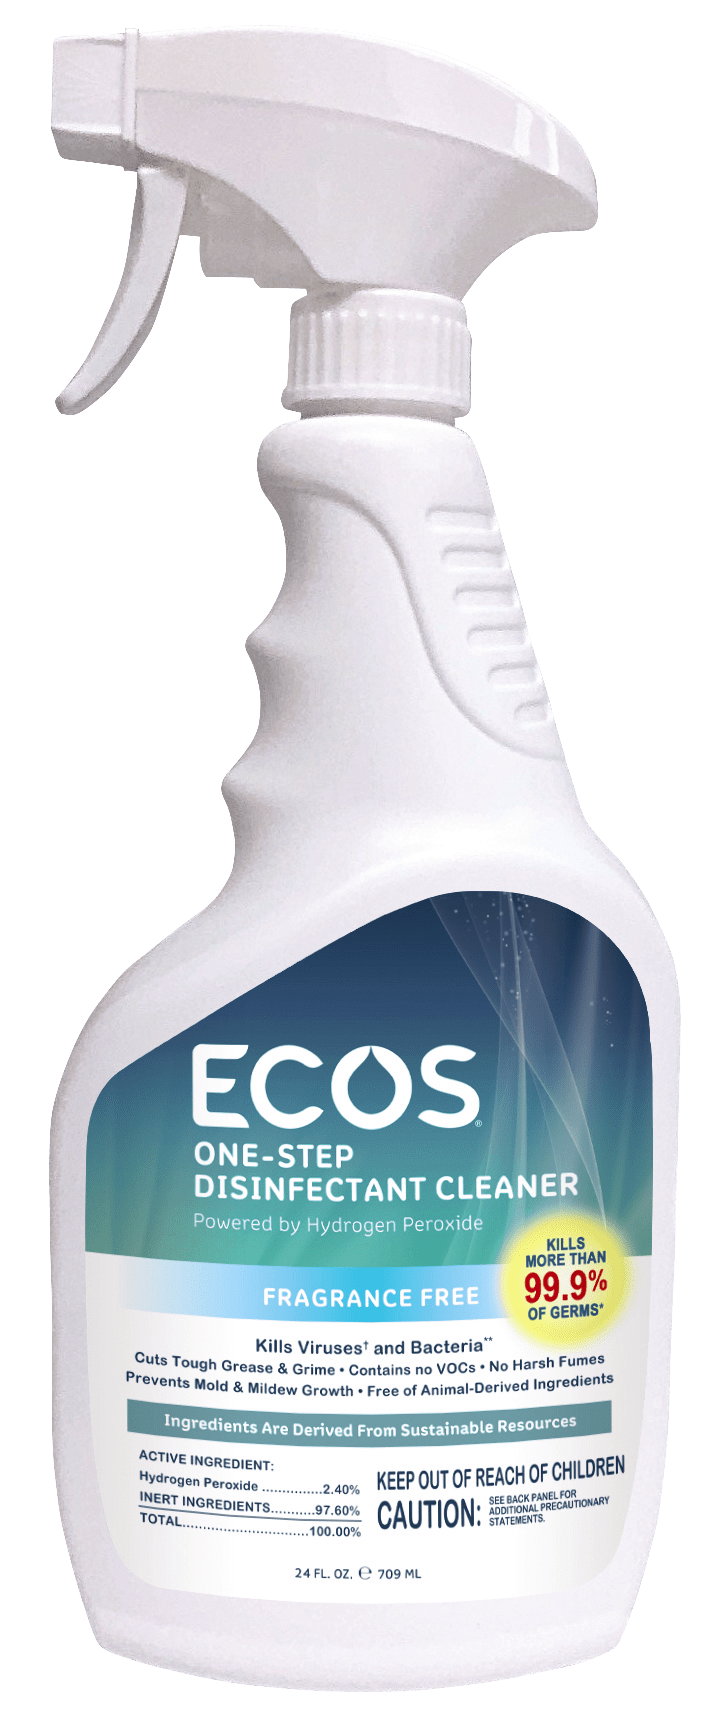 One-Step Disinfectant Cleaner: Safe Household Formula | ECOS - ECOS®